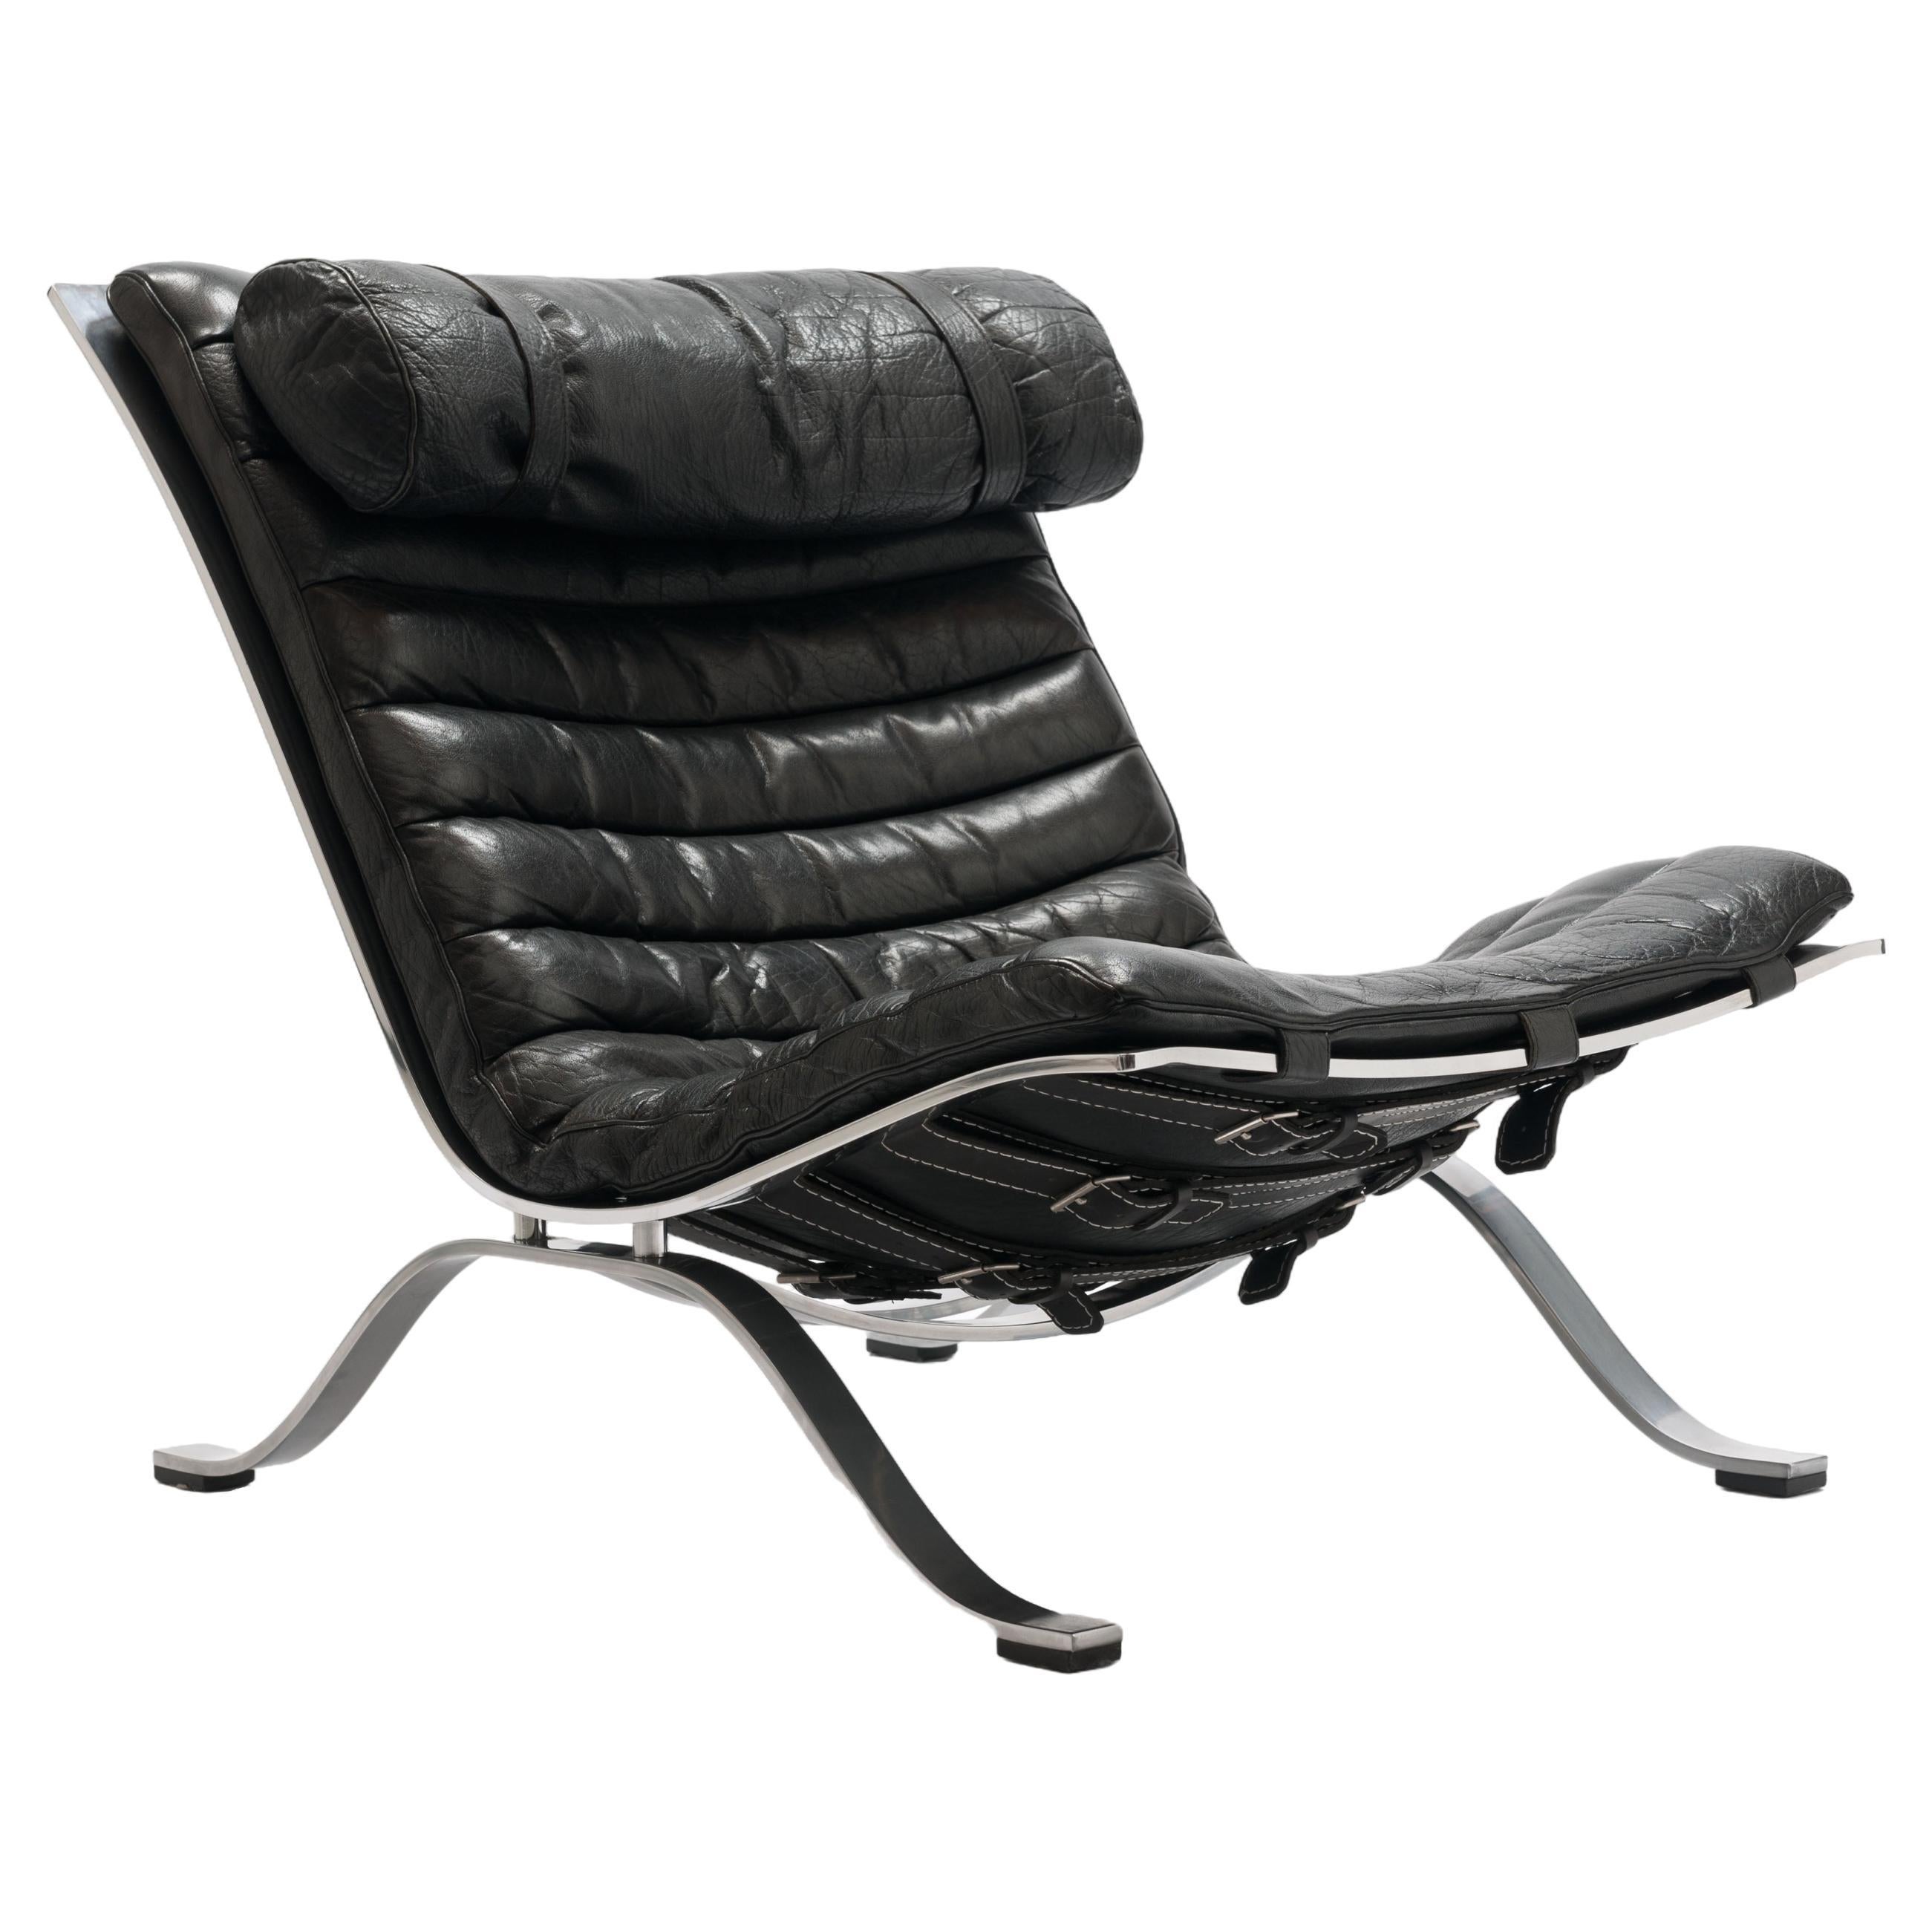  Ari Lounge Chair by Arne Norell - Pair (2) Available 